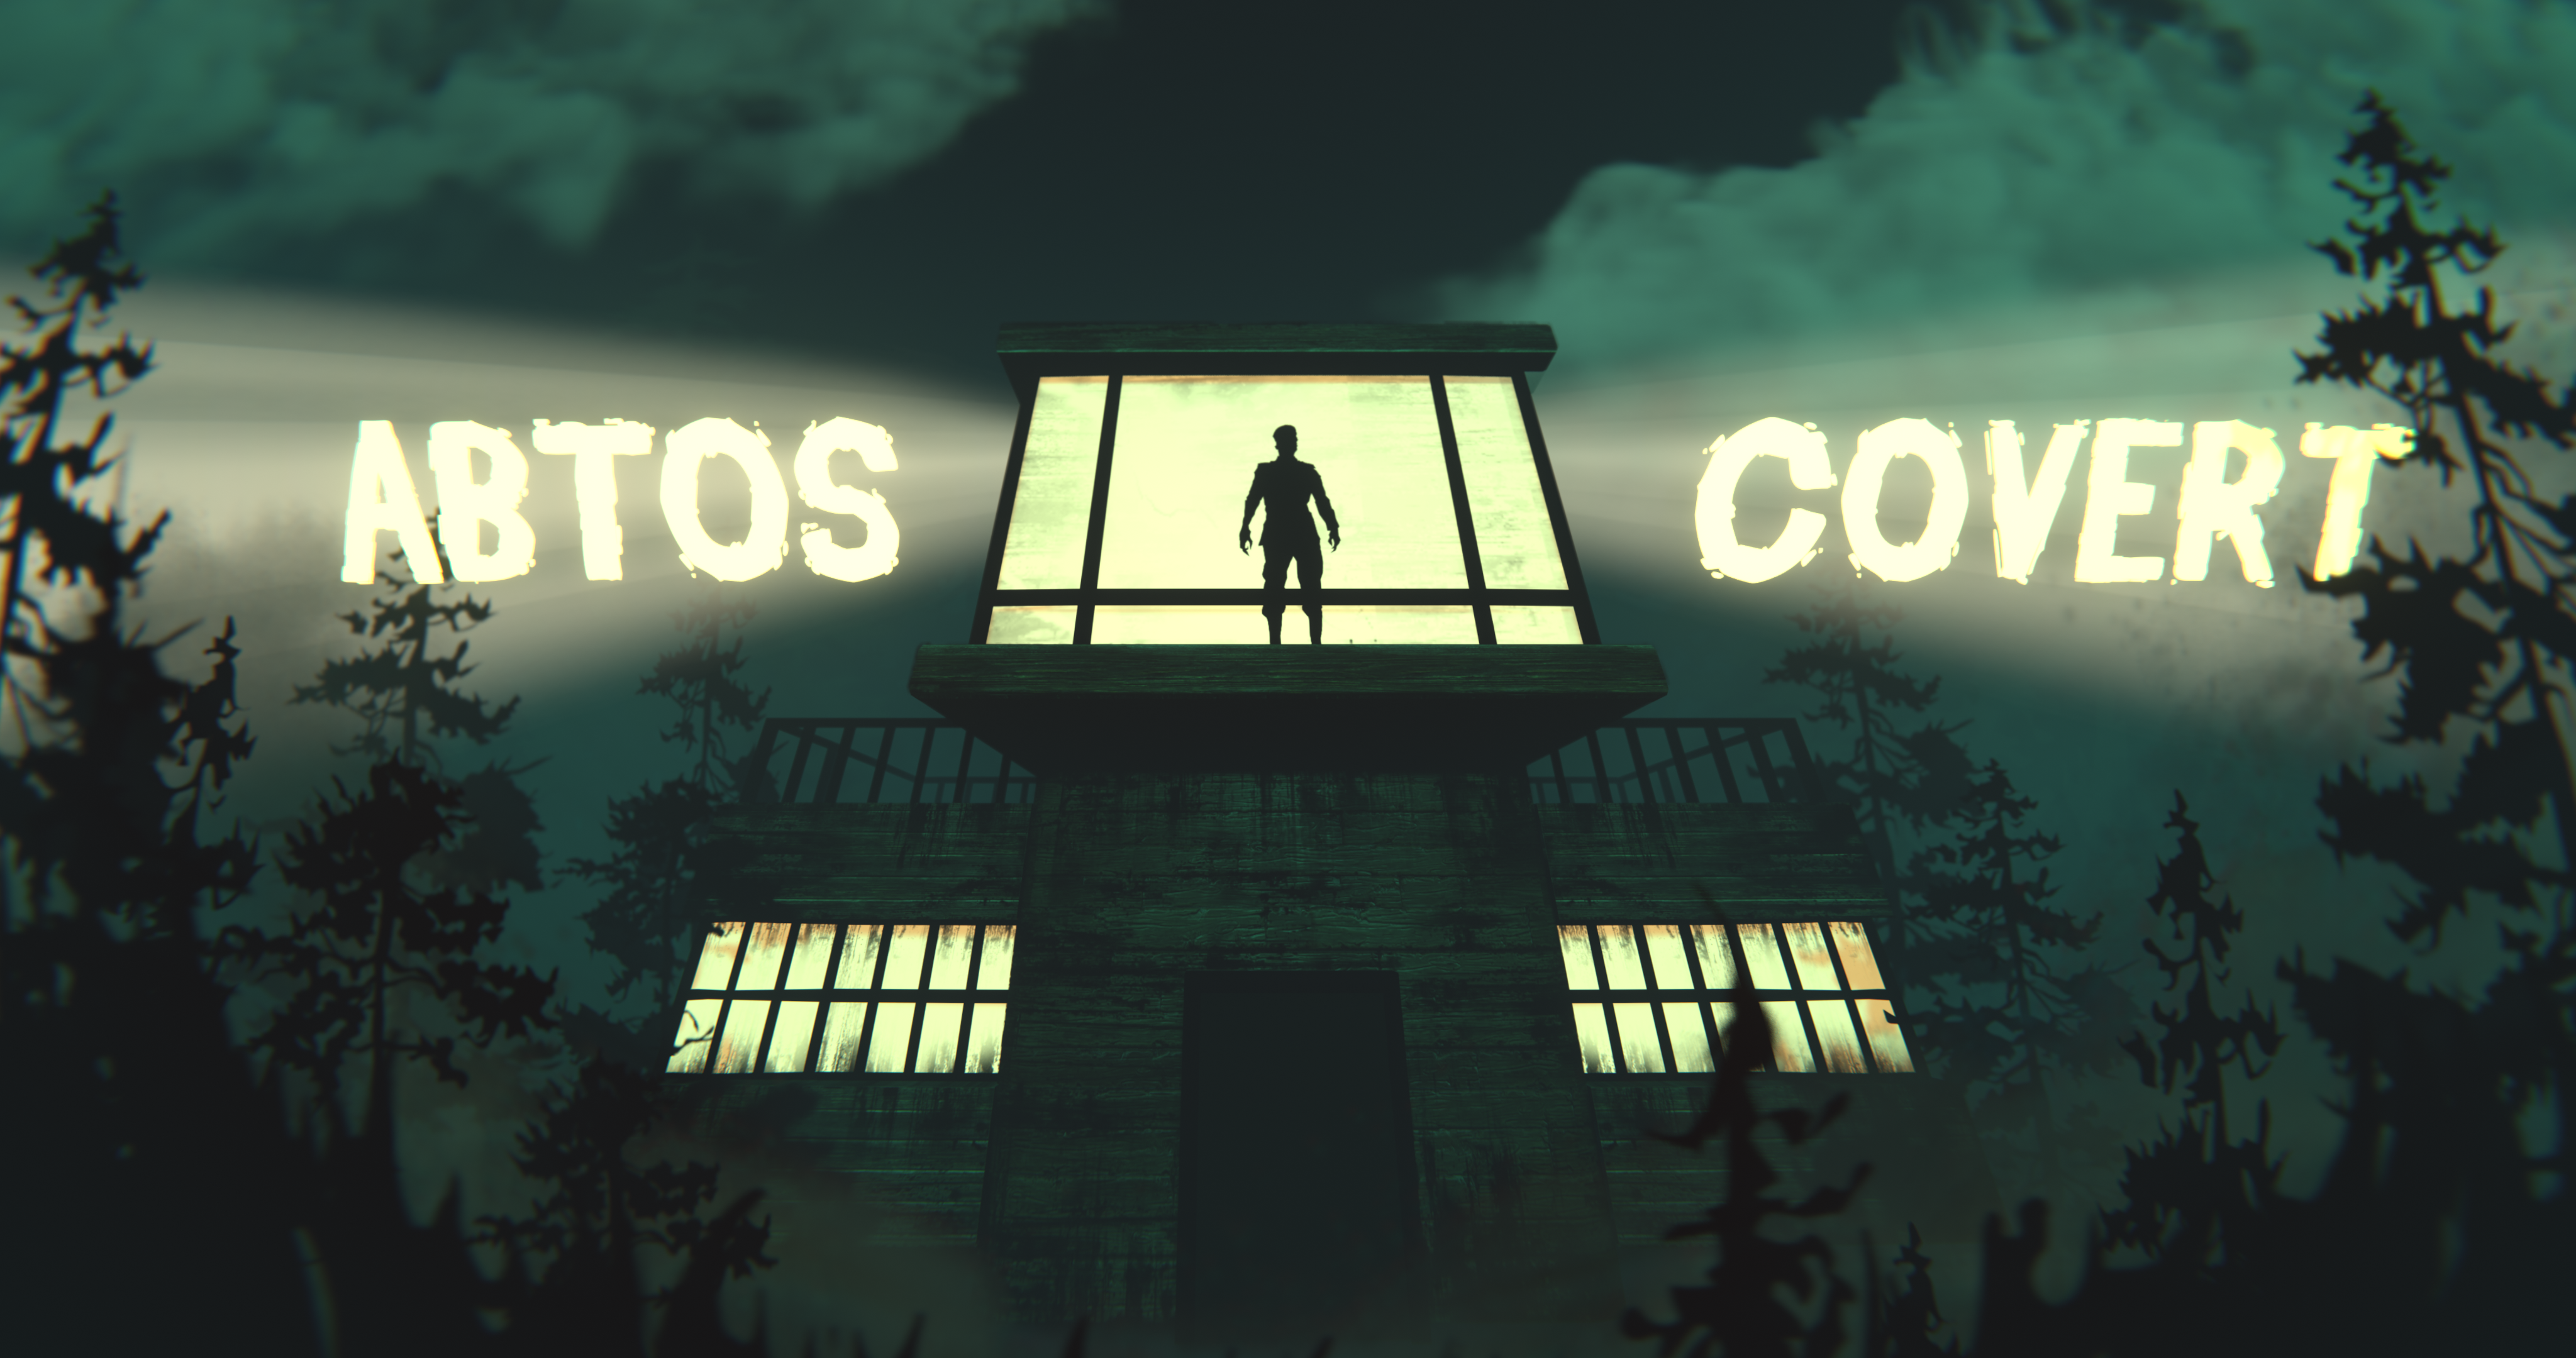 Abtos Covert concept image